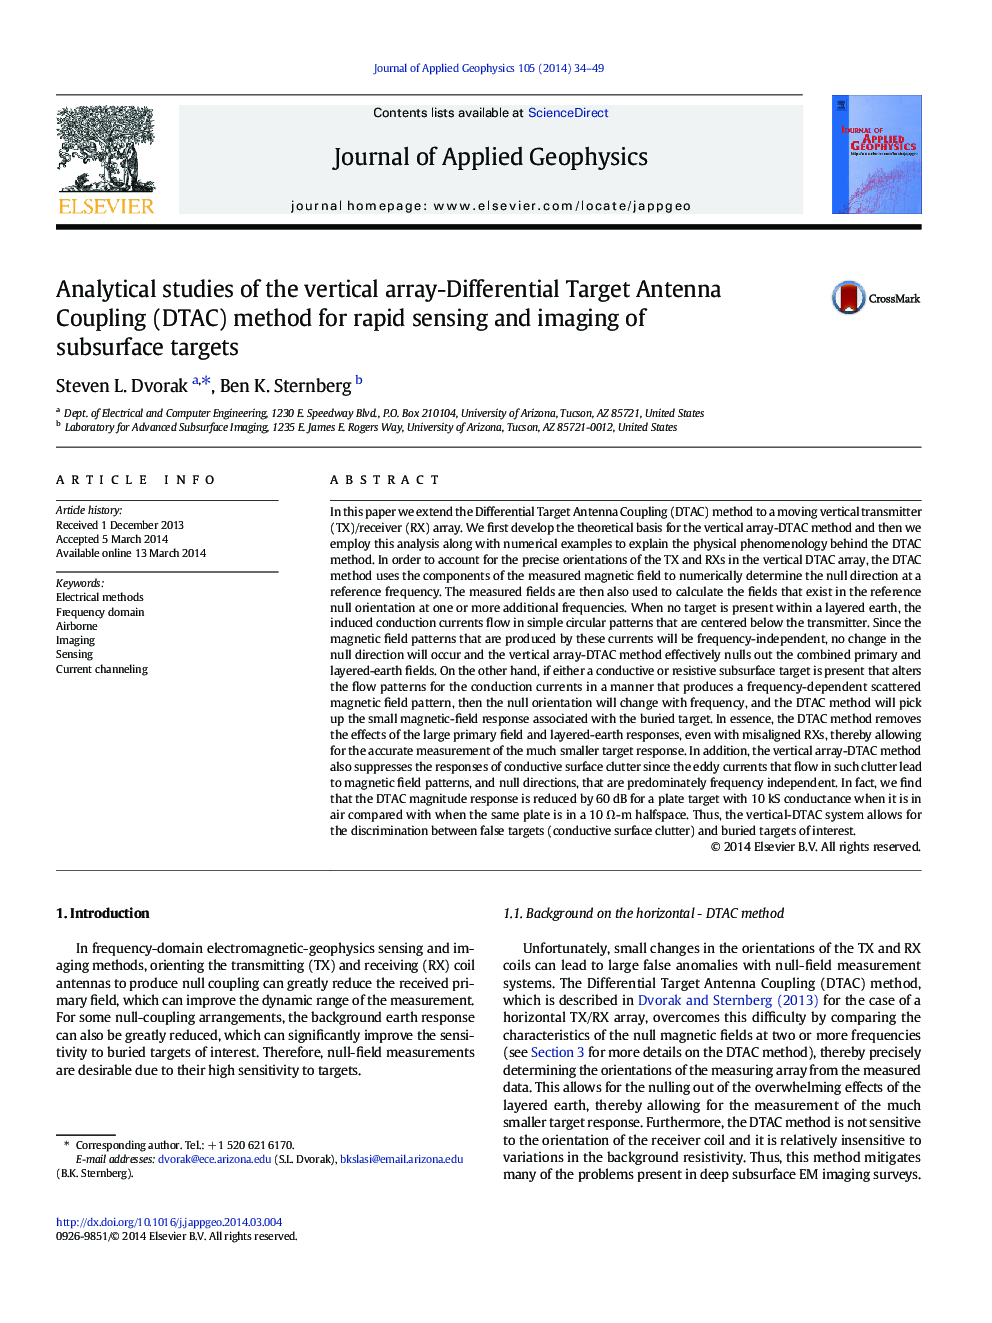 Analytical studies of the vertical array-Differential Target Antenna Coupling (DTAC) method for rapid sensing and imaging of subsurface targets